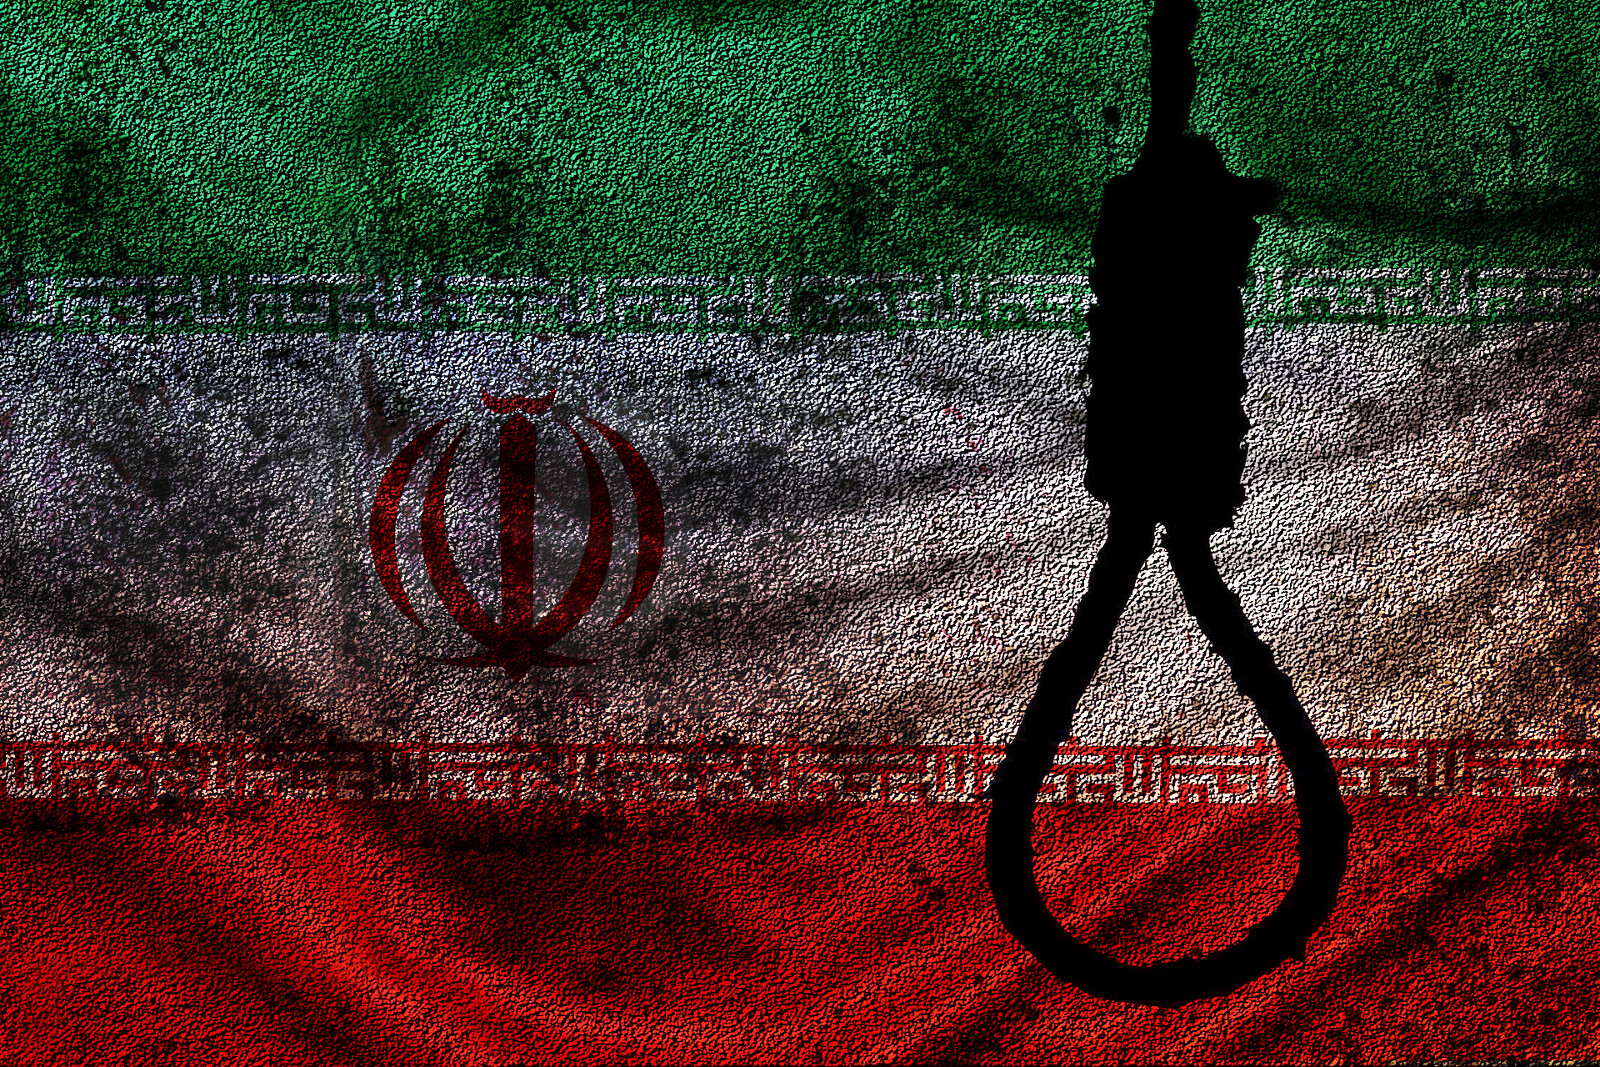 Mohammed Ghobadlou and Farhad Salimi: the tragedy of executed dissidents in Iran